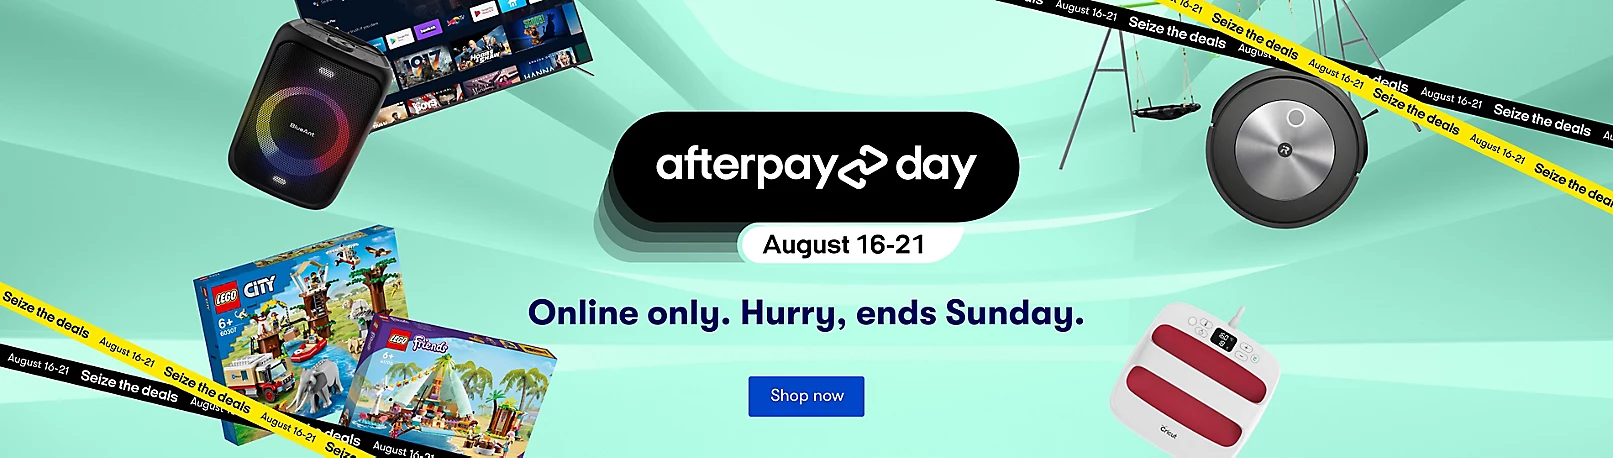 Big W Afterpay Day sale up 50% OFF on tvs, health & beauty, tech & more